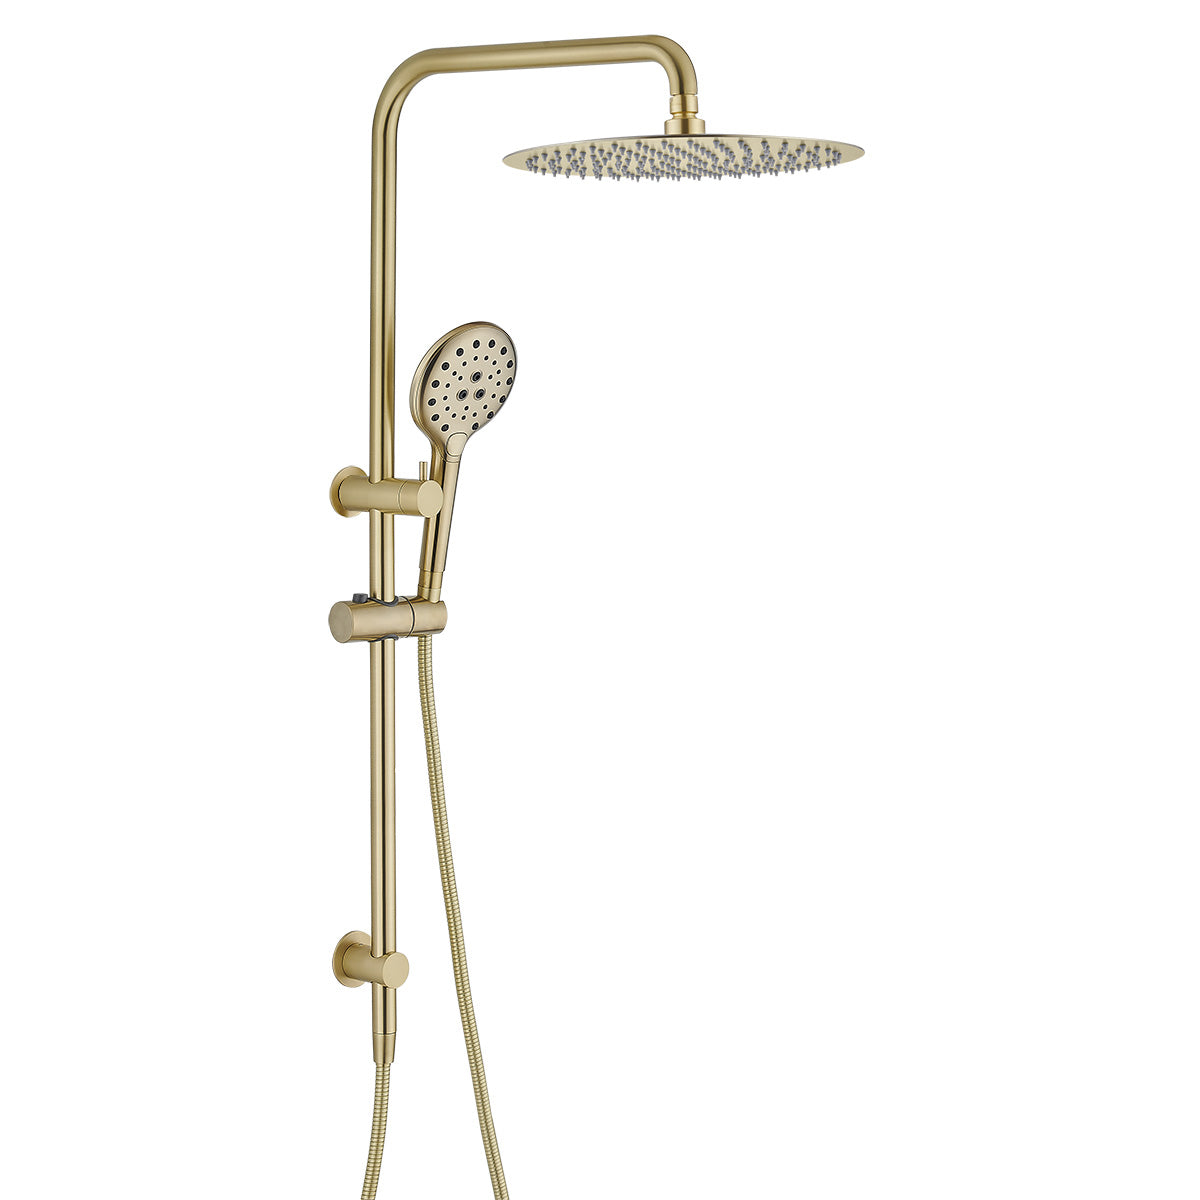 IDSSR1 (BG) / Ideal Shower System With Rail (Brushed Gold) - Hellycar Brushed Gold Dual Shower Head with Handheld Combo and Rail